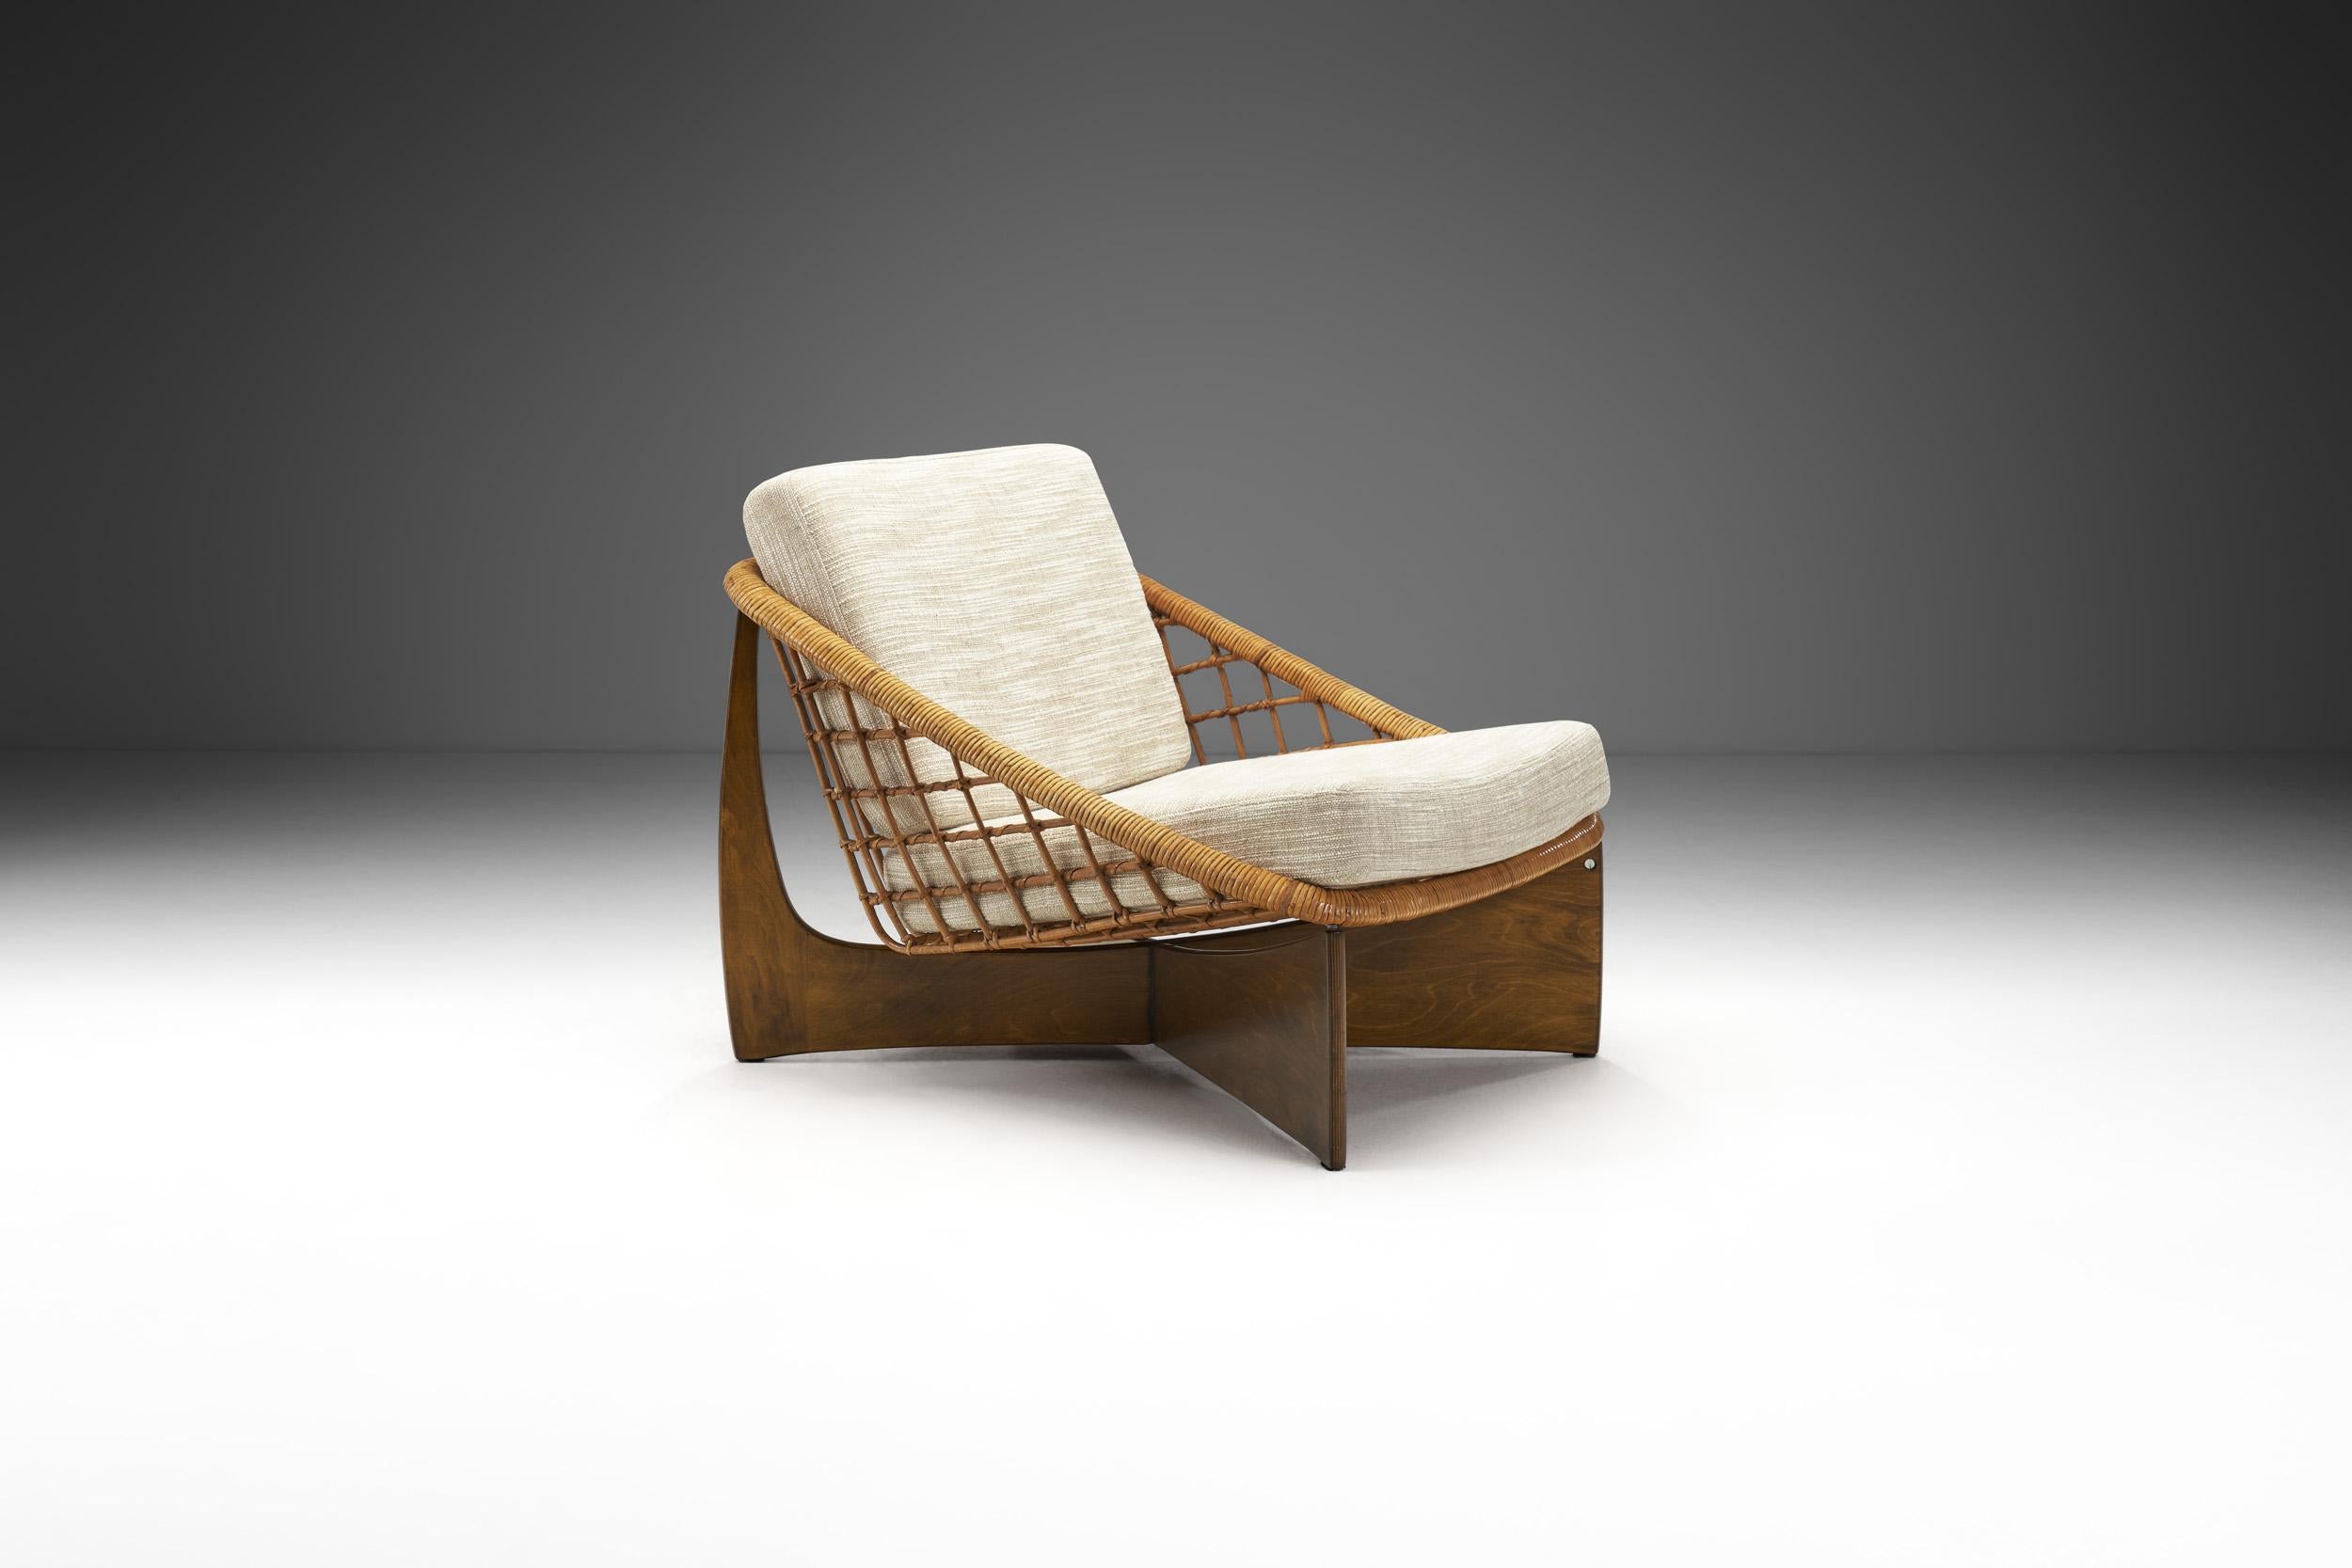 This “Rokato” lounge chair is an immediately recognizable design by the Dutch designers, Gebroeders Jonkers (Jonkers Brothers). In the middle of the last century, rattan played an important role in Dutch Design. The cradle was located in Noordwolde